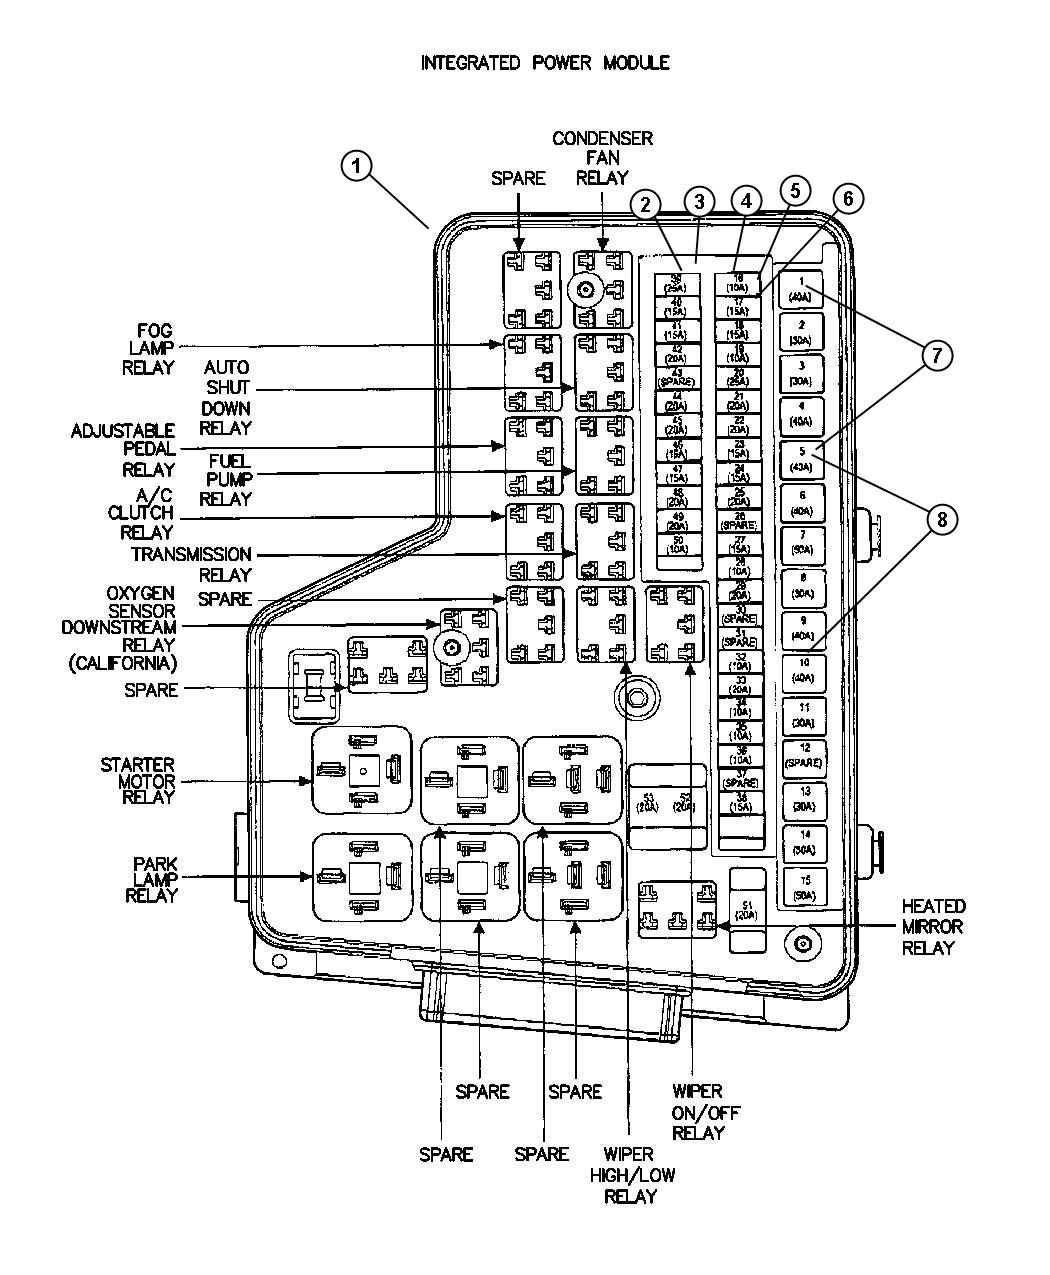 Power Distribution Center Relays and Fuses. Diagram